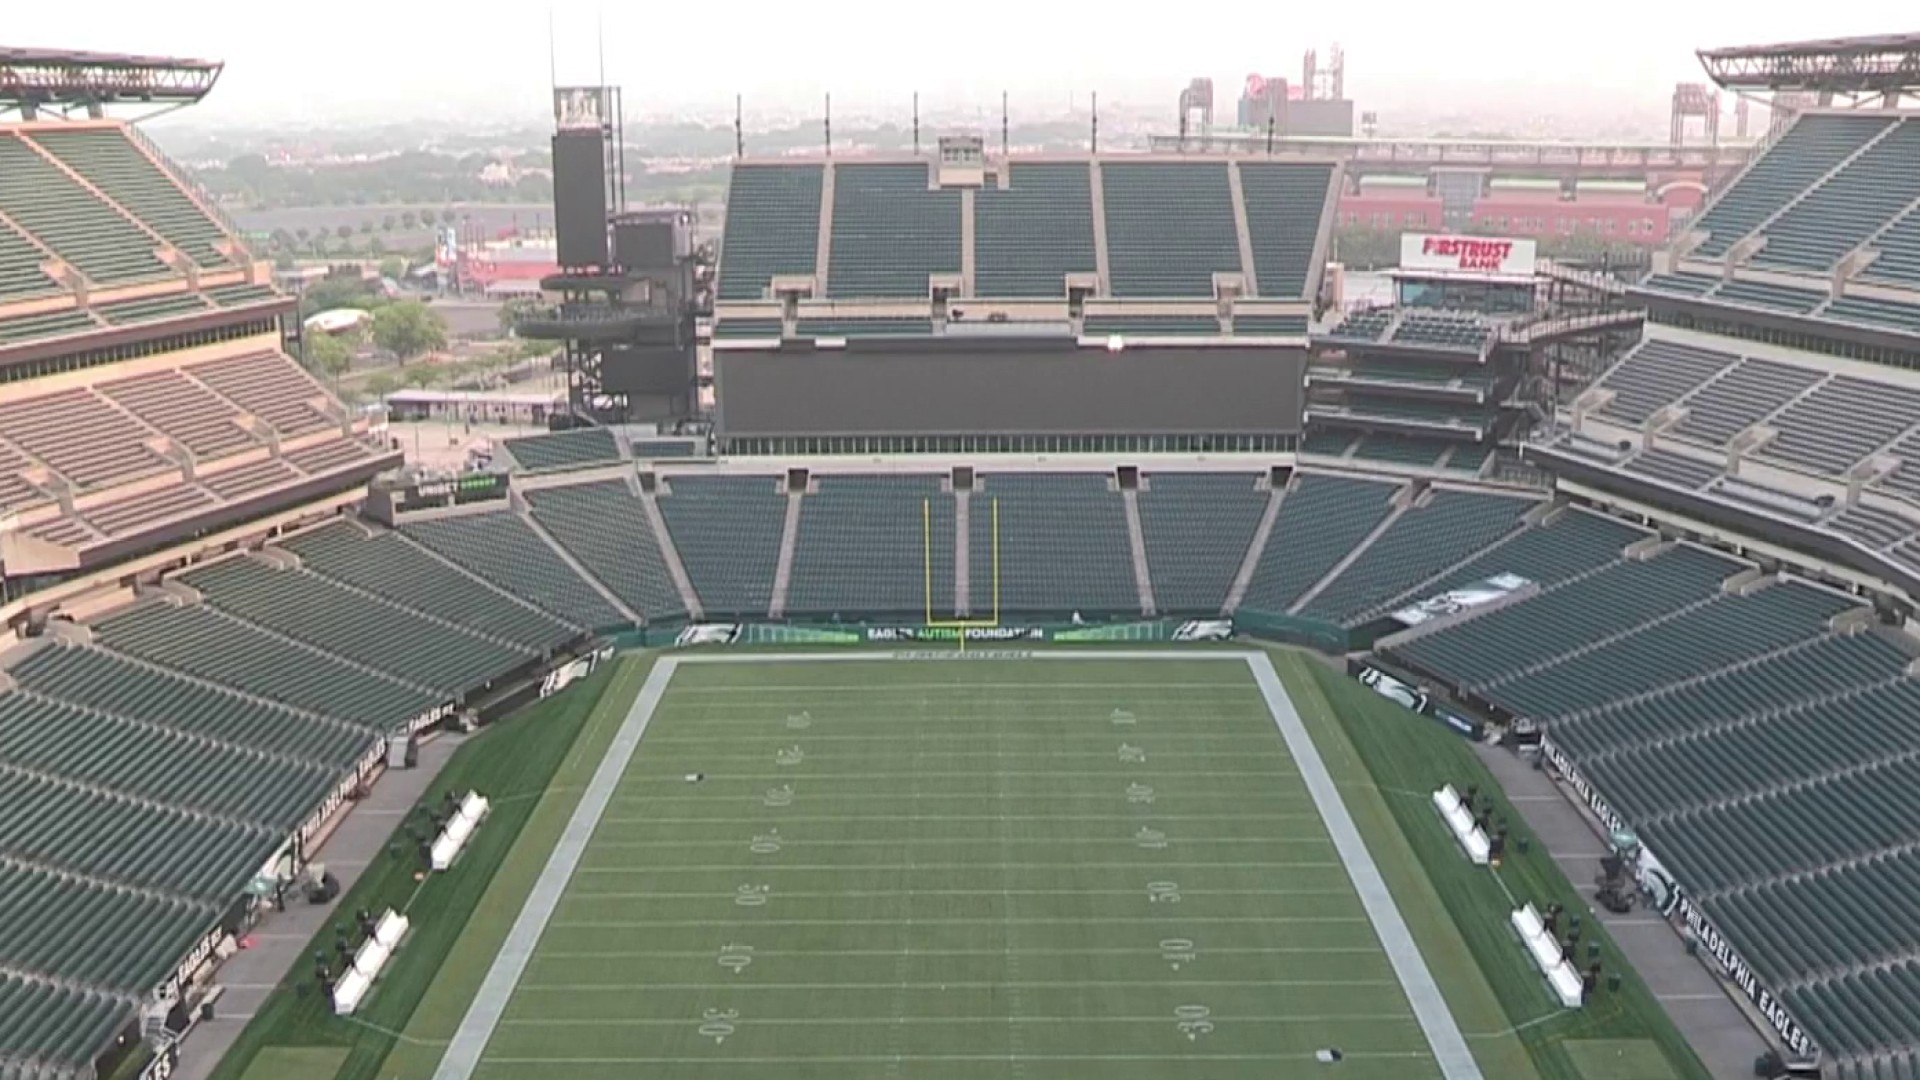 For Lincoln Financial, 20 years of naming rights for the Eagles